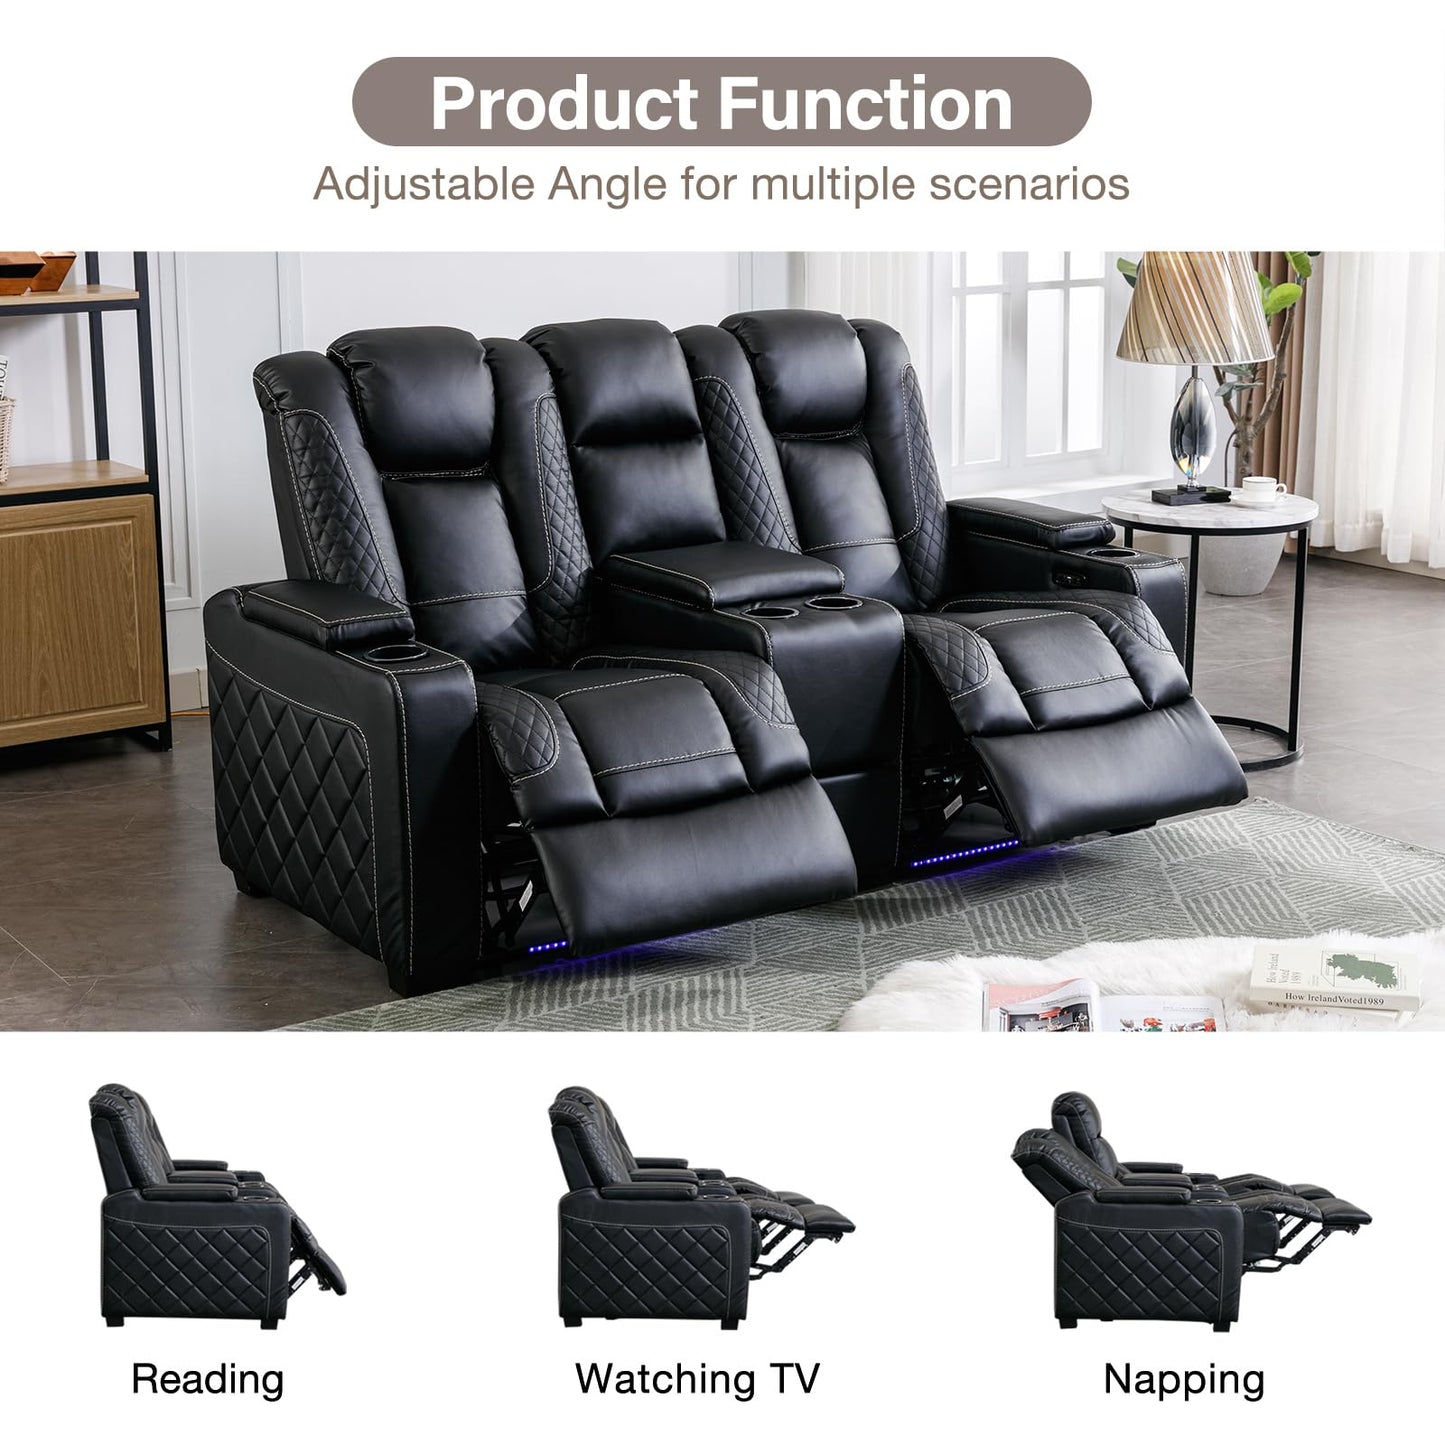 EBELLO Home Theater Seating with Ambient Lighting, Electric Power Loveseat Recliner with Adjustable Headrest, Faux Leather Dual Recliner with Hidden Arm Storage, USB Ports and Cup Holders, Black